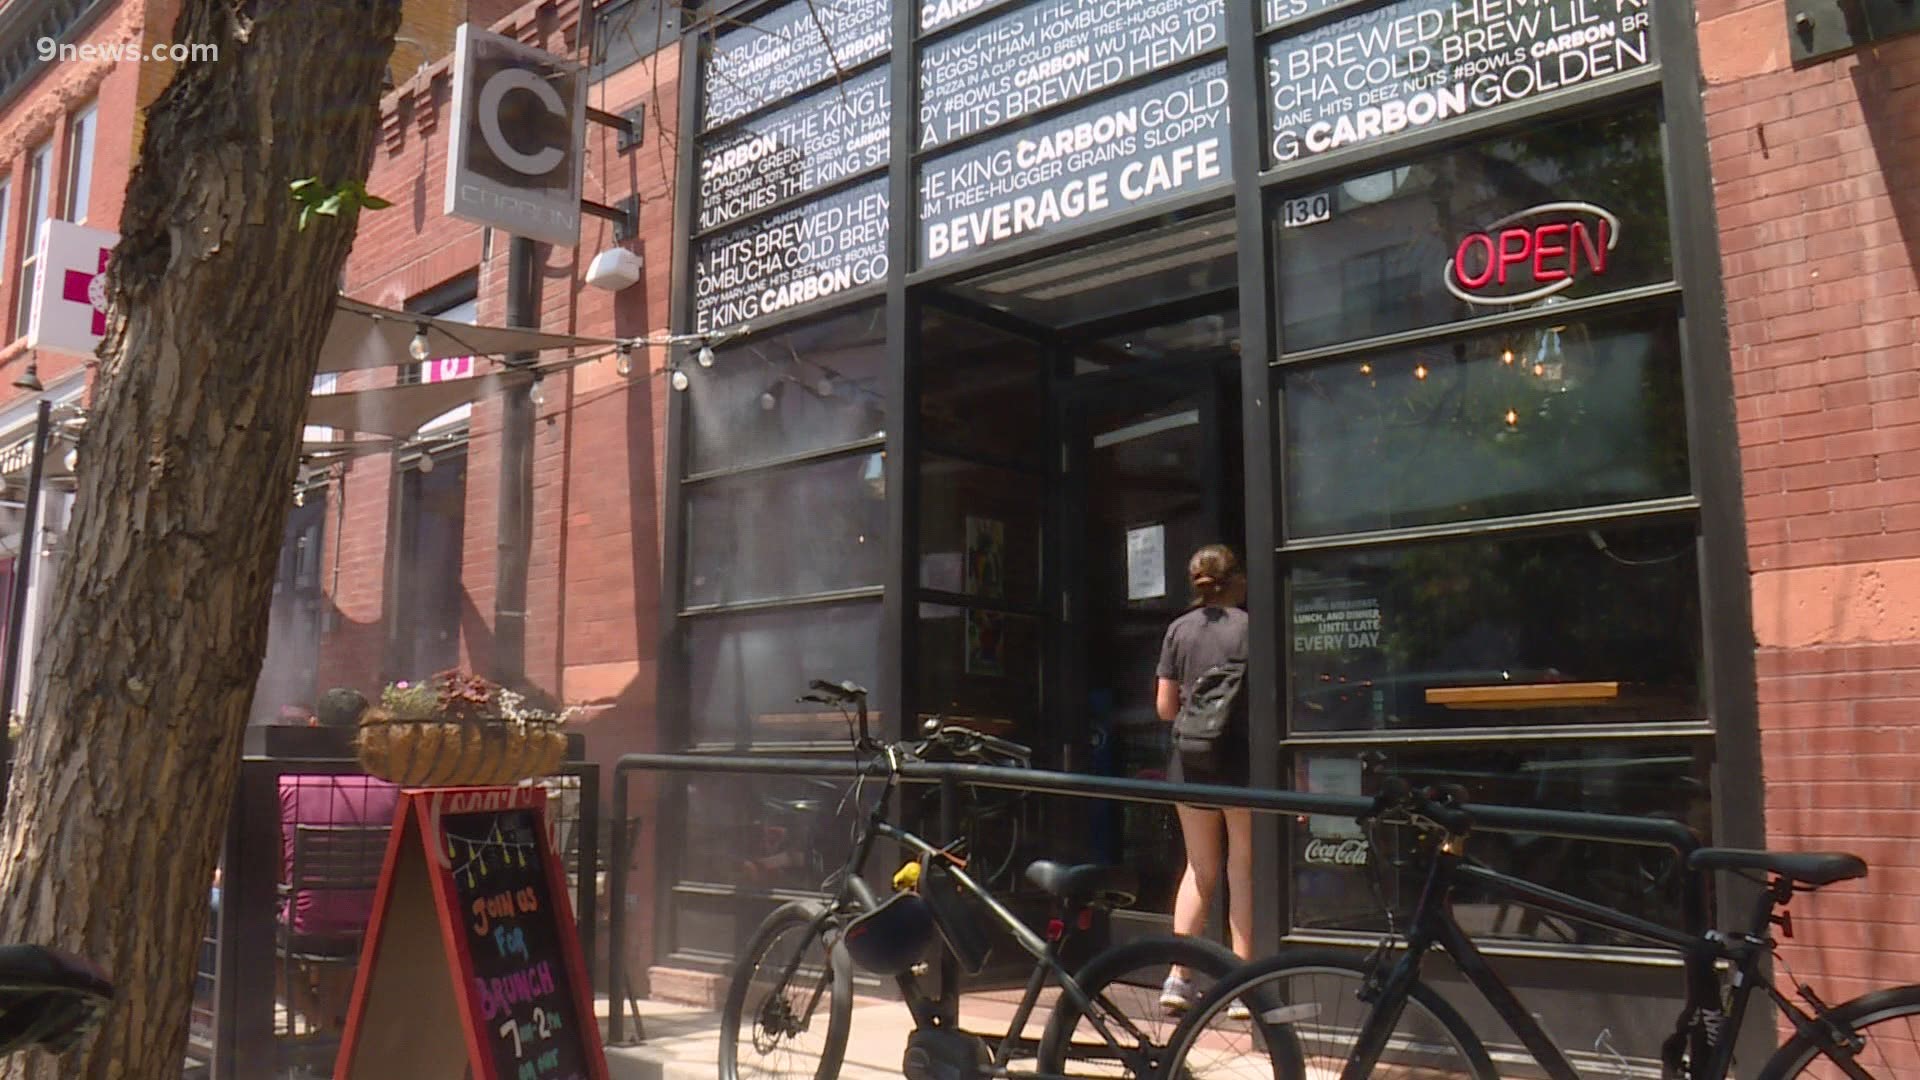 "There’s no doubt [the money] would be helpful for us," a Denver business owner told 9NEWS.